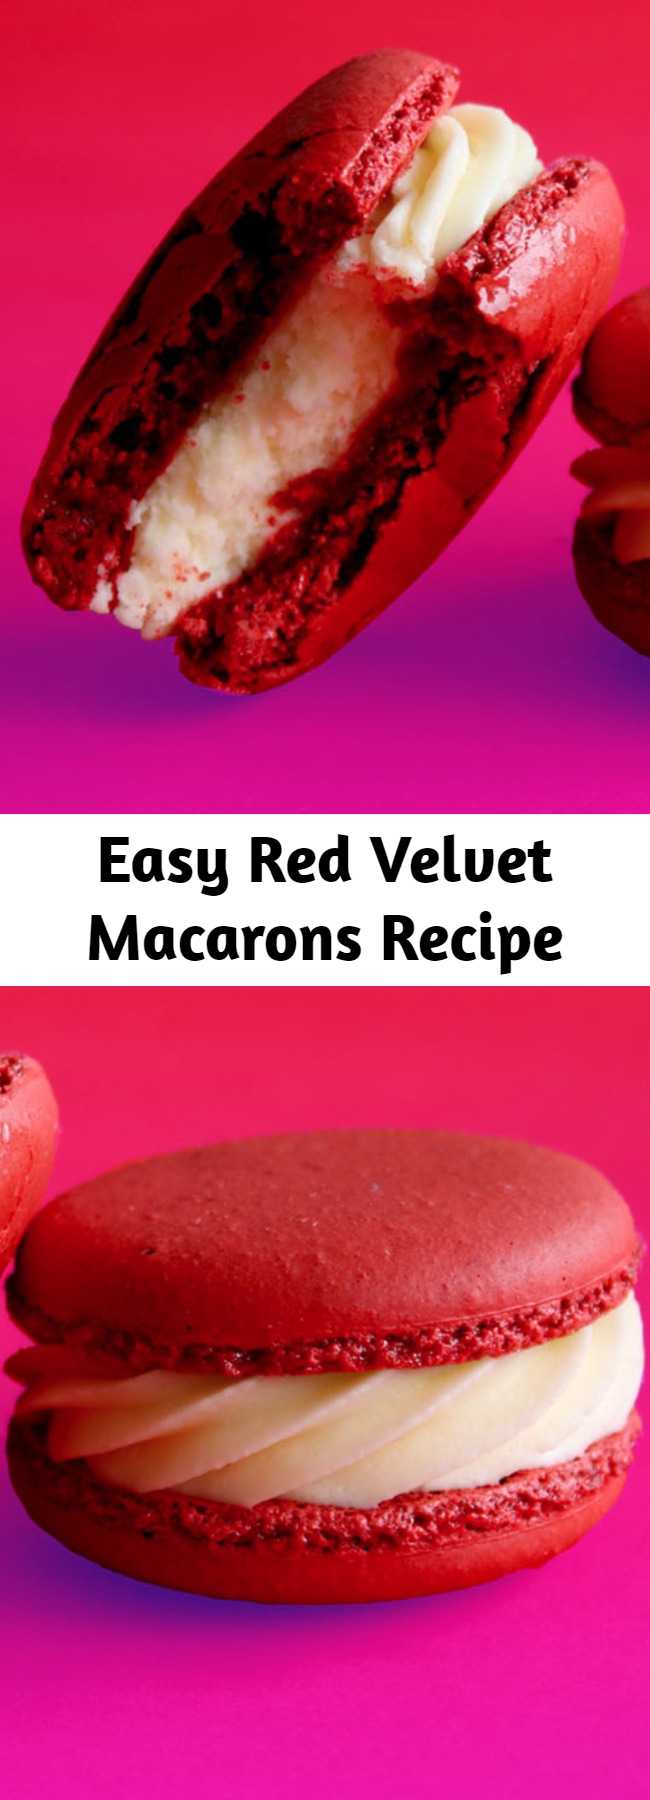 Easy Red Velvet Macarons Recipe - When you're craving just a little red velvet goodness, this sweet macaron will hit the spot.